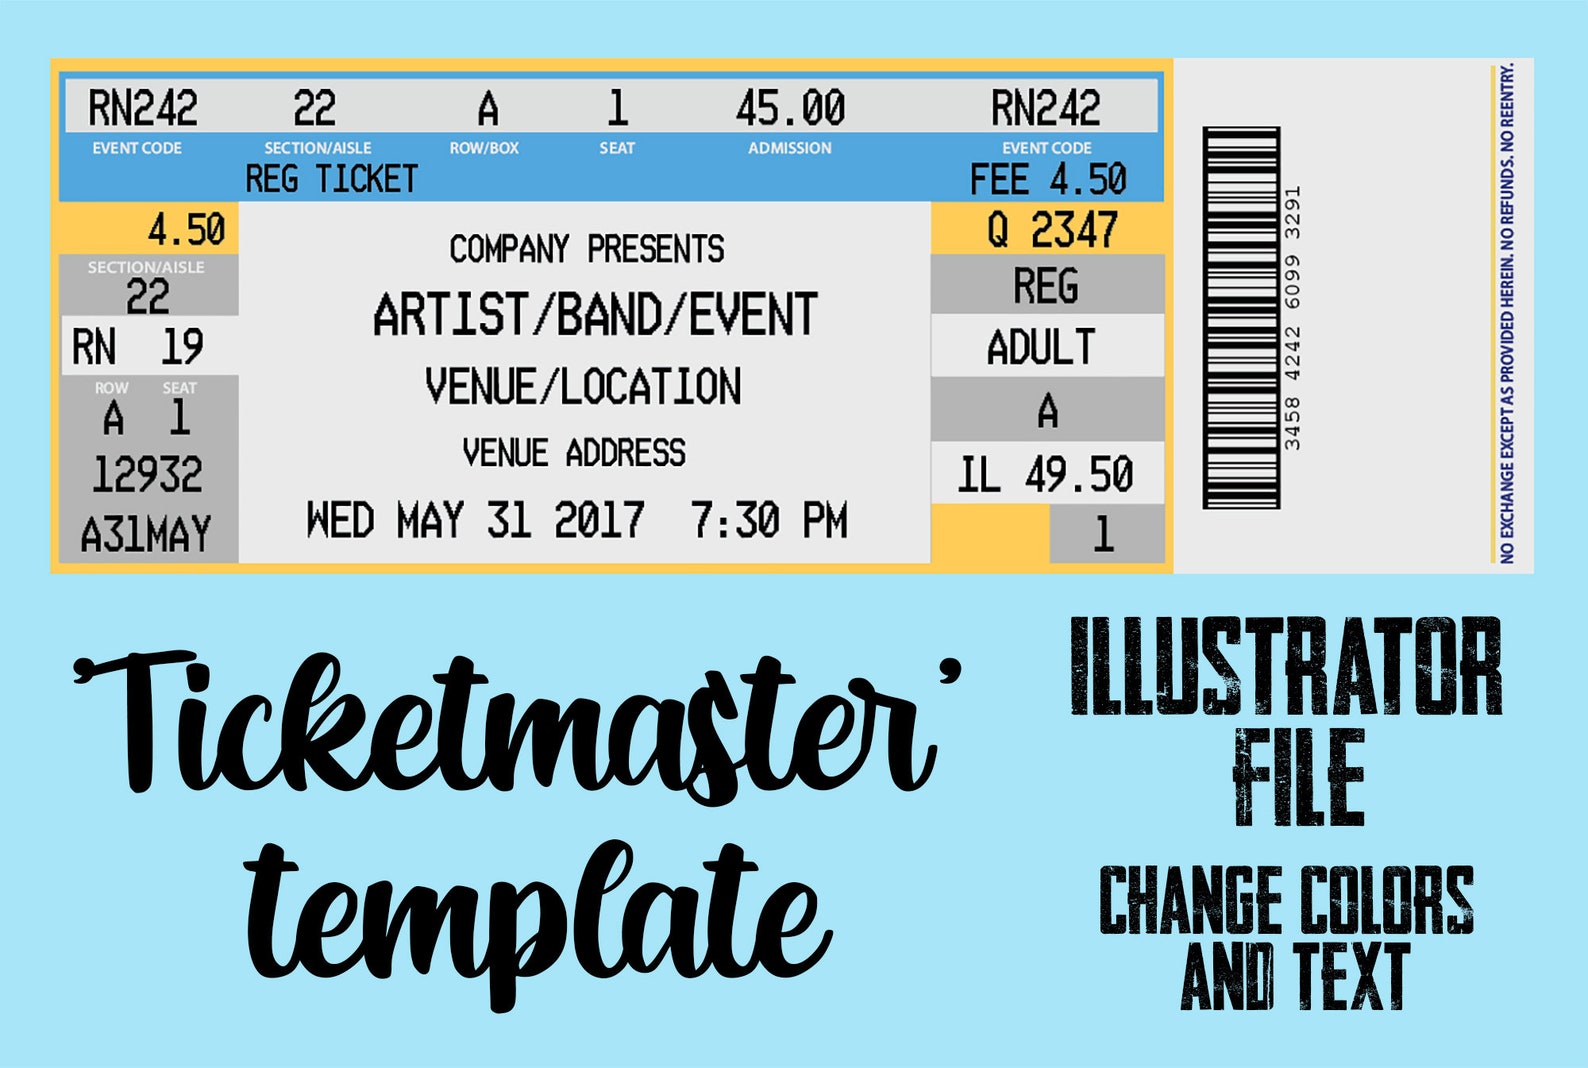 ticketmaster-printable-tickets-in-the-best-interest-of-fans-and-staff-the-event-organizer-will